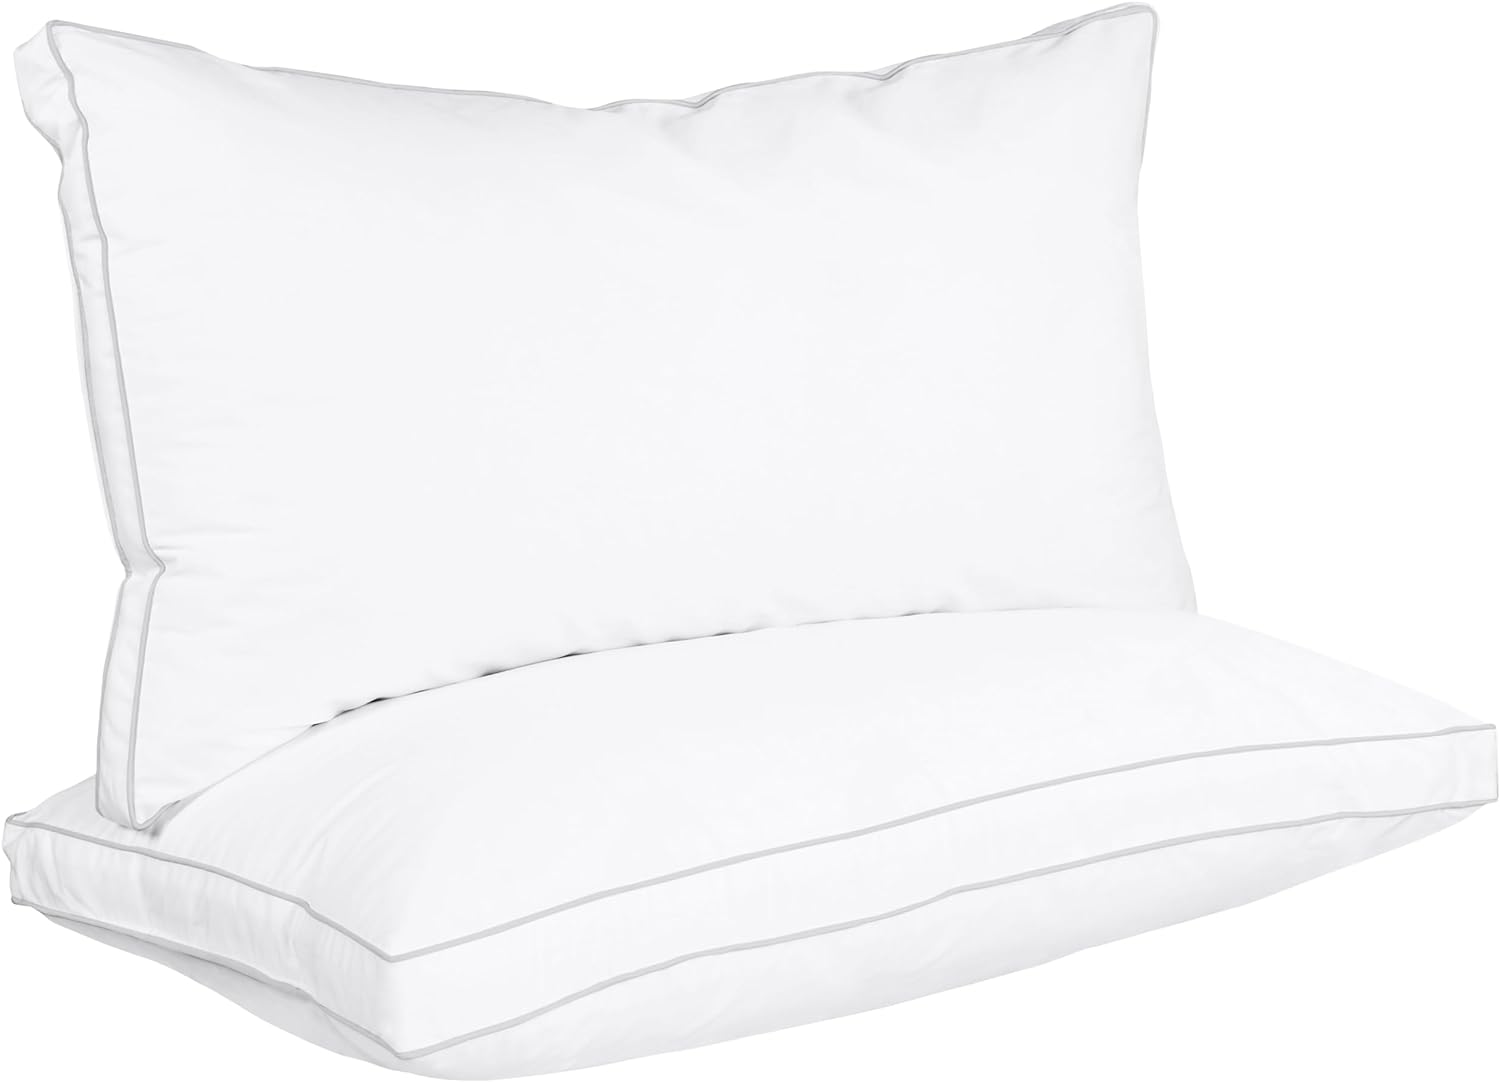 Save Big on Utopia Bedding Bed Pillows - Limited Time Offer!